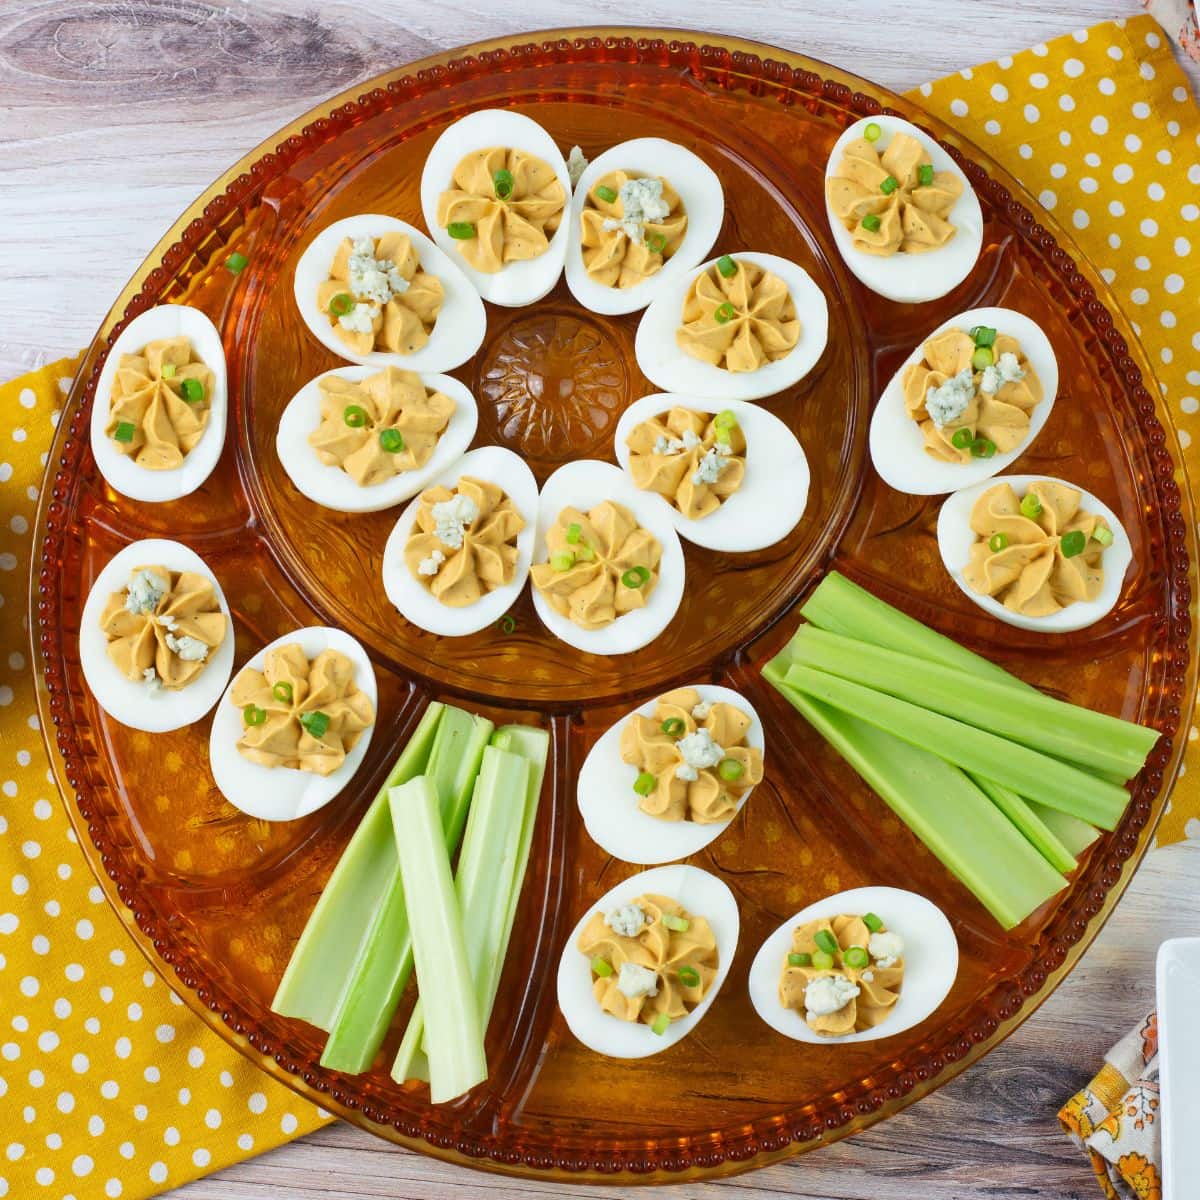 Buffalo Deviled Eggs garnished with blue cheese and sliced green onion served on a deviled egg plate.